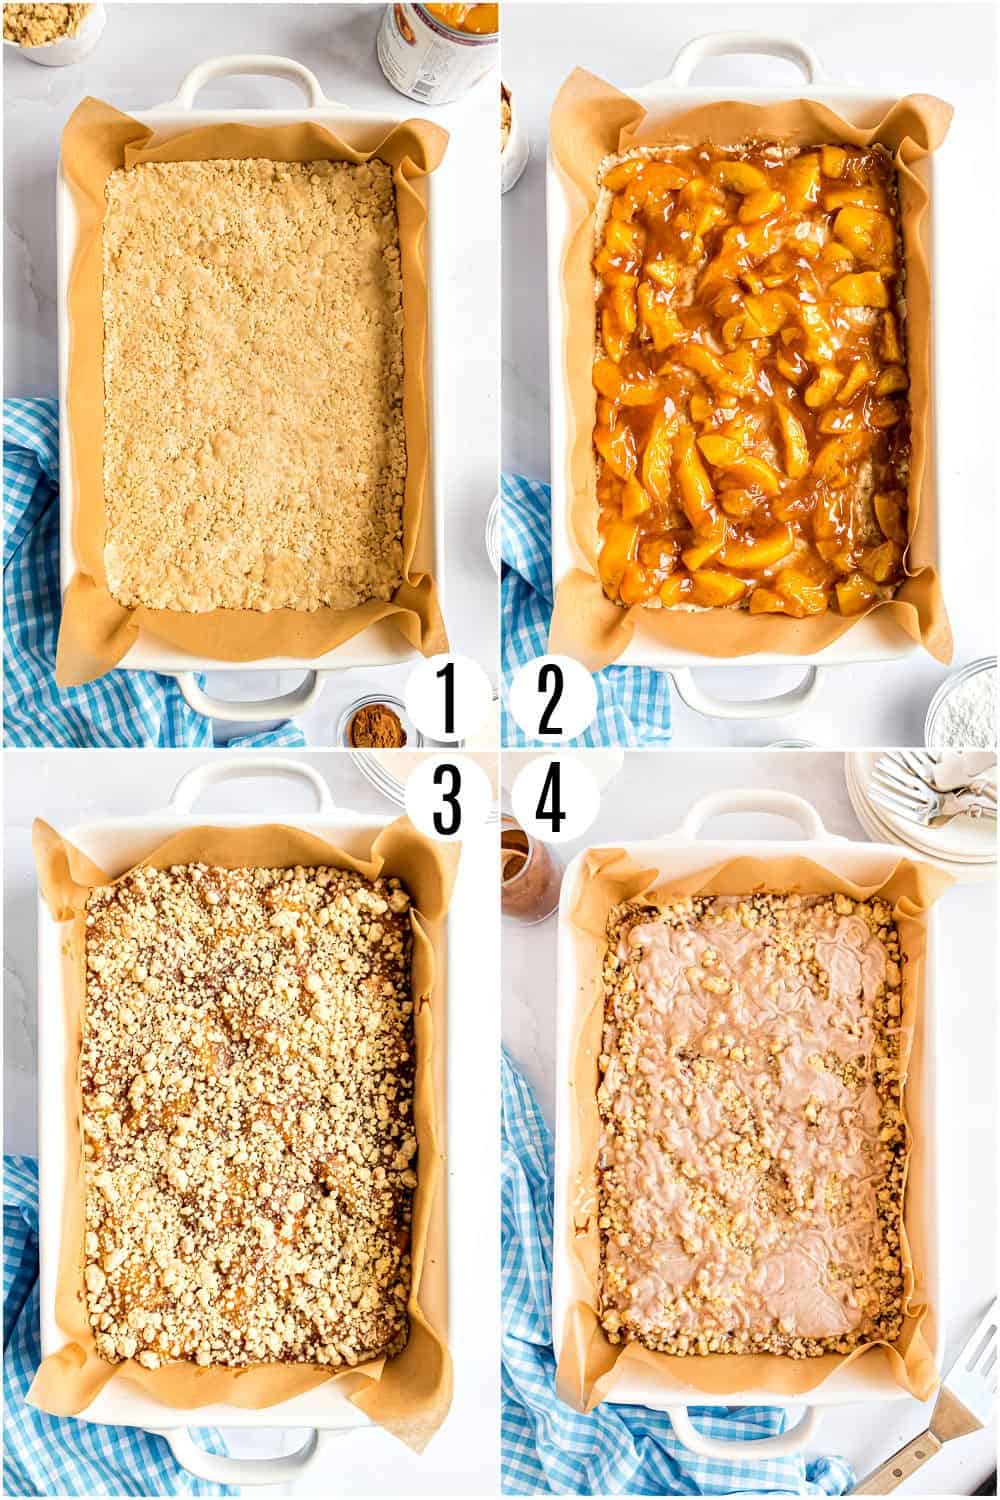 Step by step photos showing how to make peach bars.